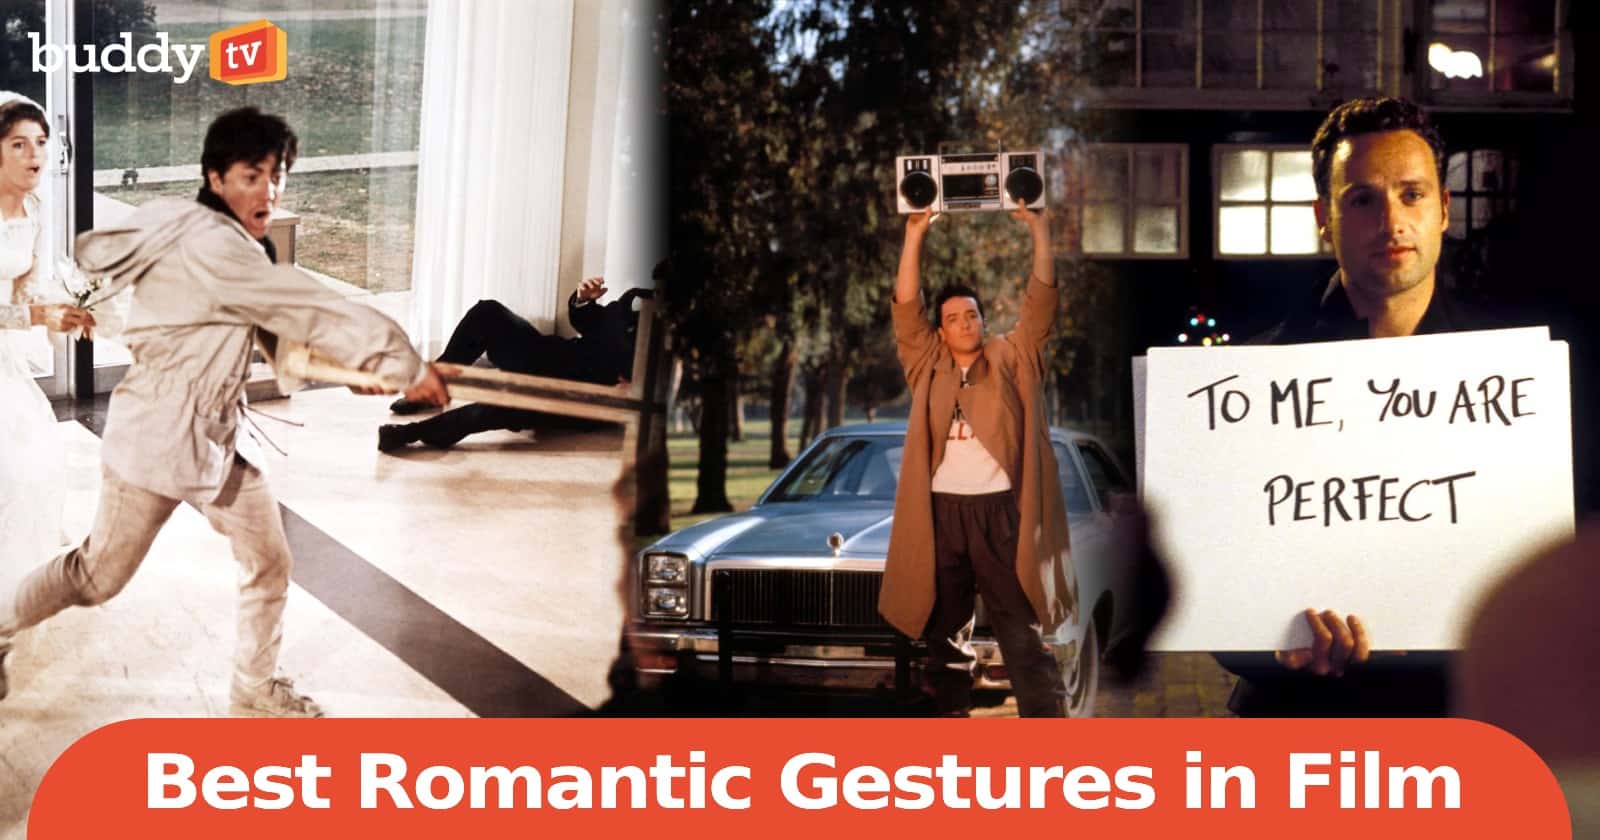 50 Best Romantic Gestures in Film of All-Time